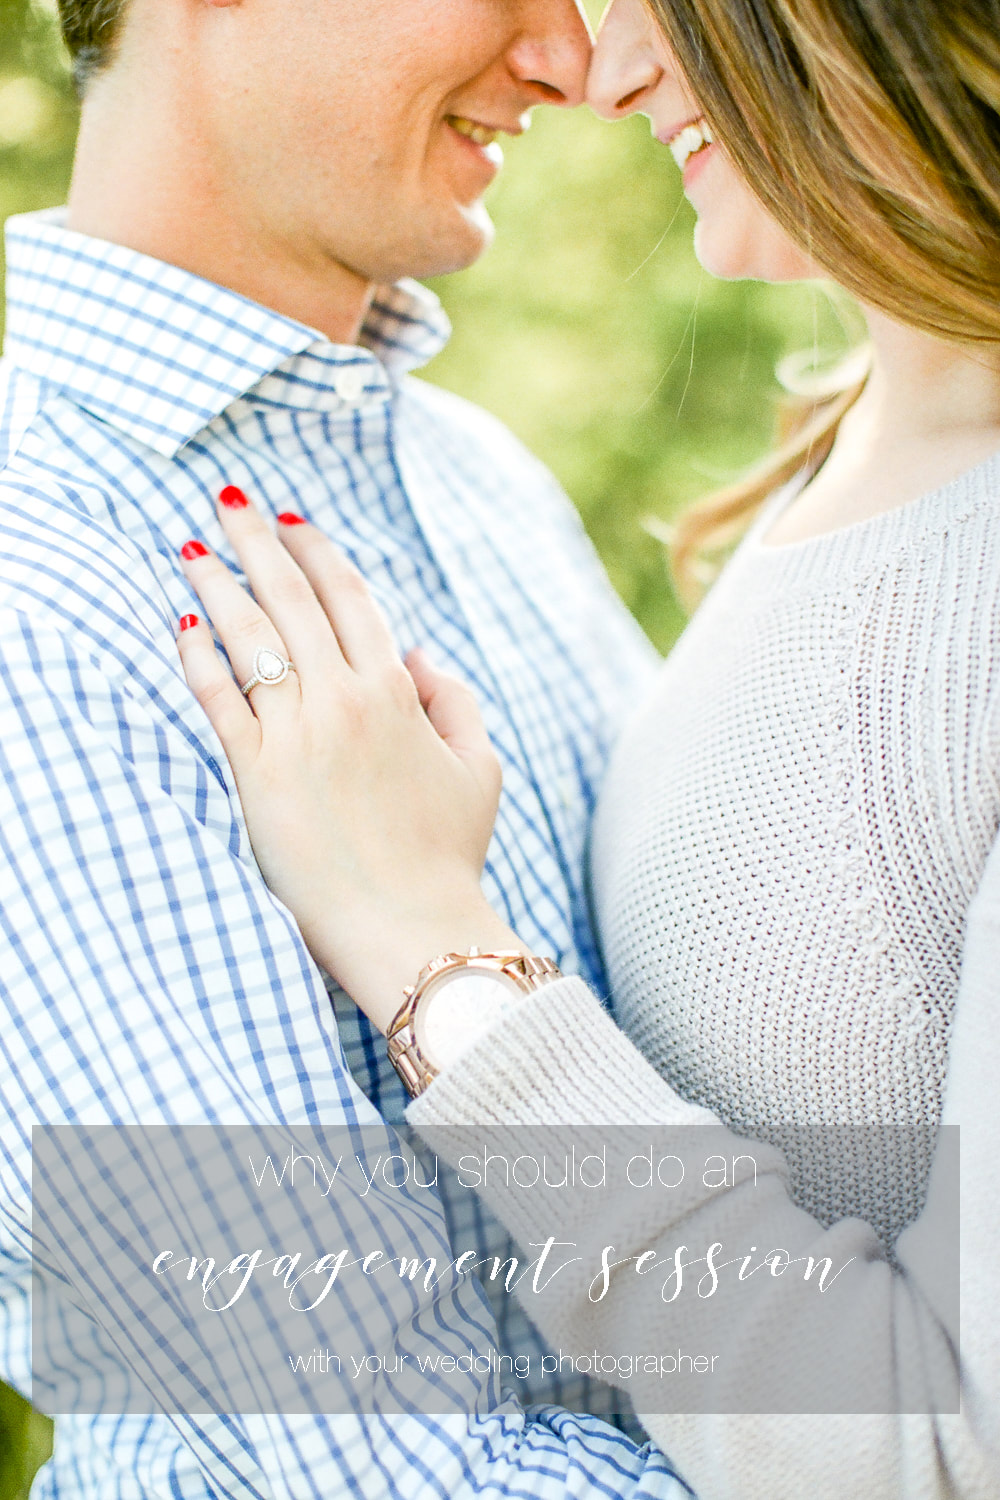 why you should do an engagement session with your wedding photographer